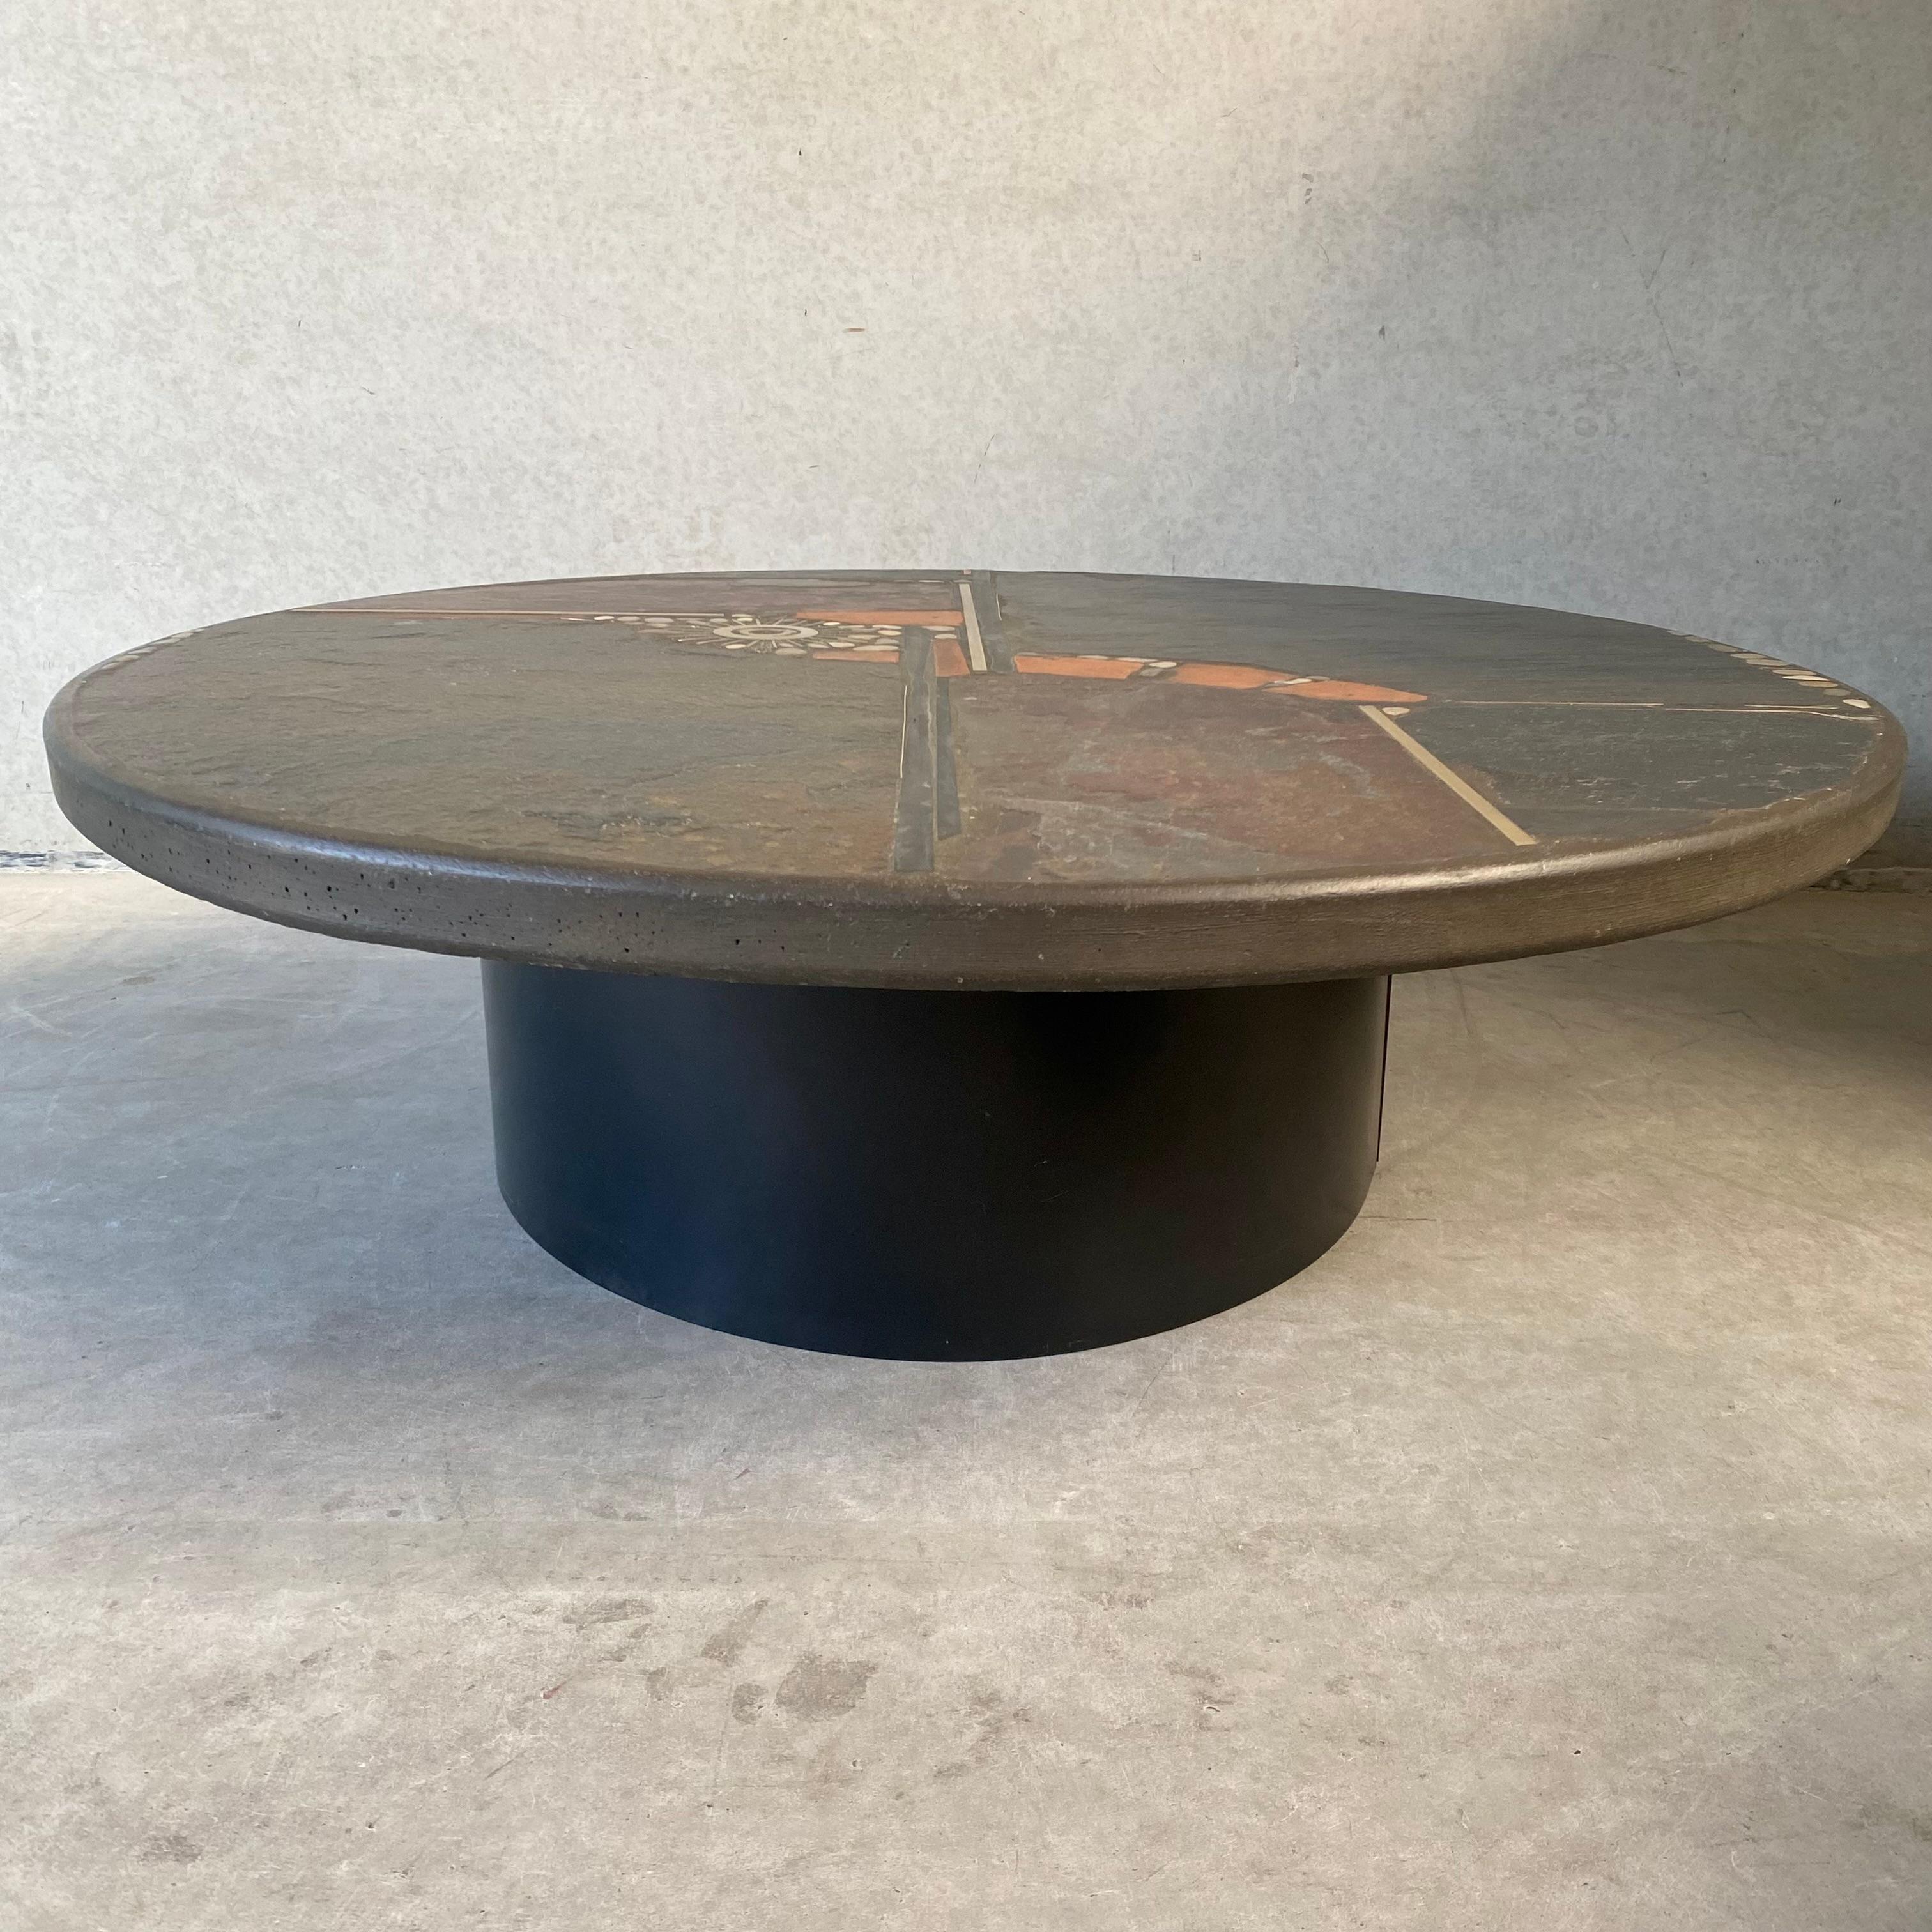 Brutalist Round Coffee Table by Sculptor Paul Kingma, Netherlands, 1985 For Sale 5